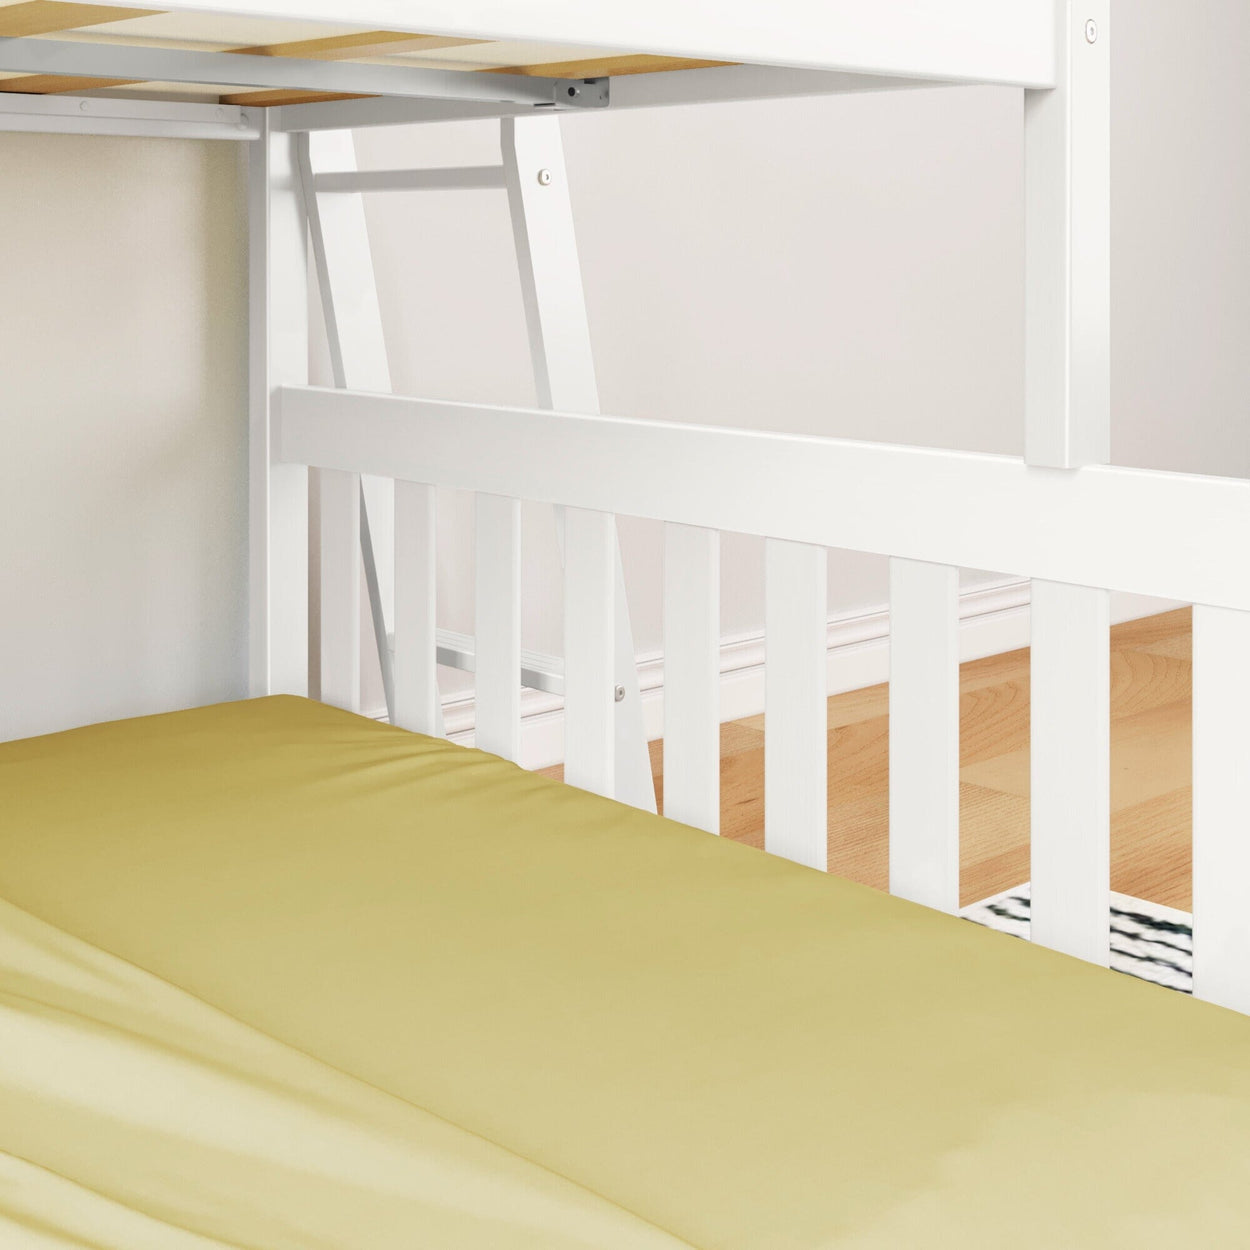 185323-002 : Bunk Beds Twin over Full Low Bunk with Angled Ladder on End, White